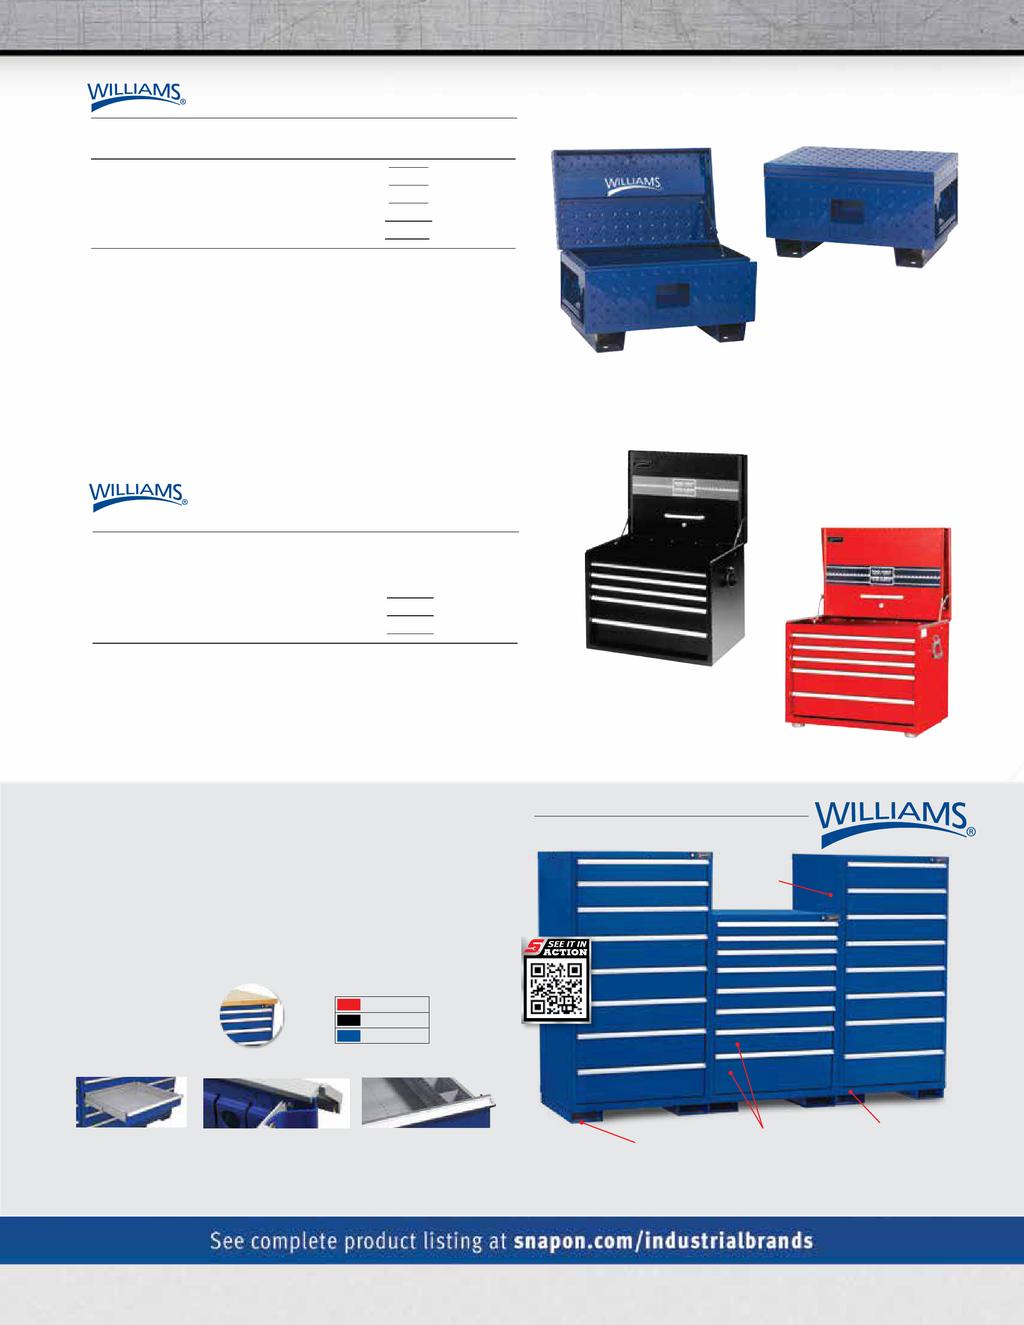 JOB SITE BOXES Designed for the toughest outdoor work environments 50950 32" W X 19" D X 17.5" H $448.20 $192.09 50951 42" W X 20" D X 23.4" H $644.50 $276.21 50952 48" W X 24" D X 27.5" H $840.